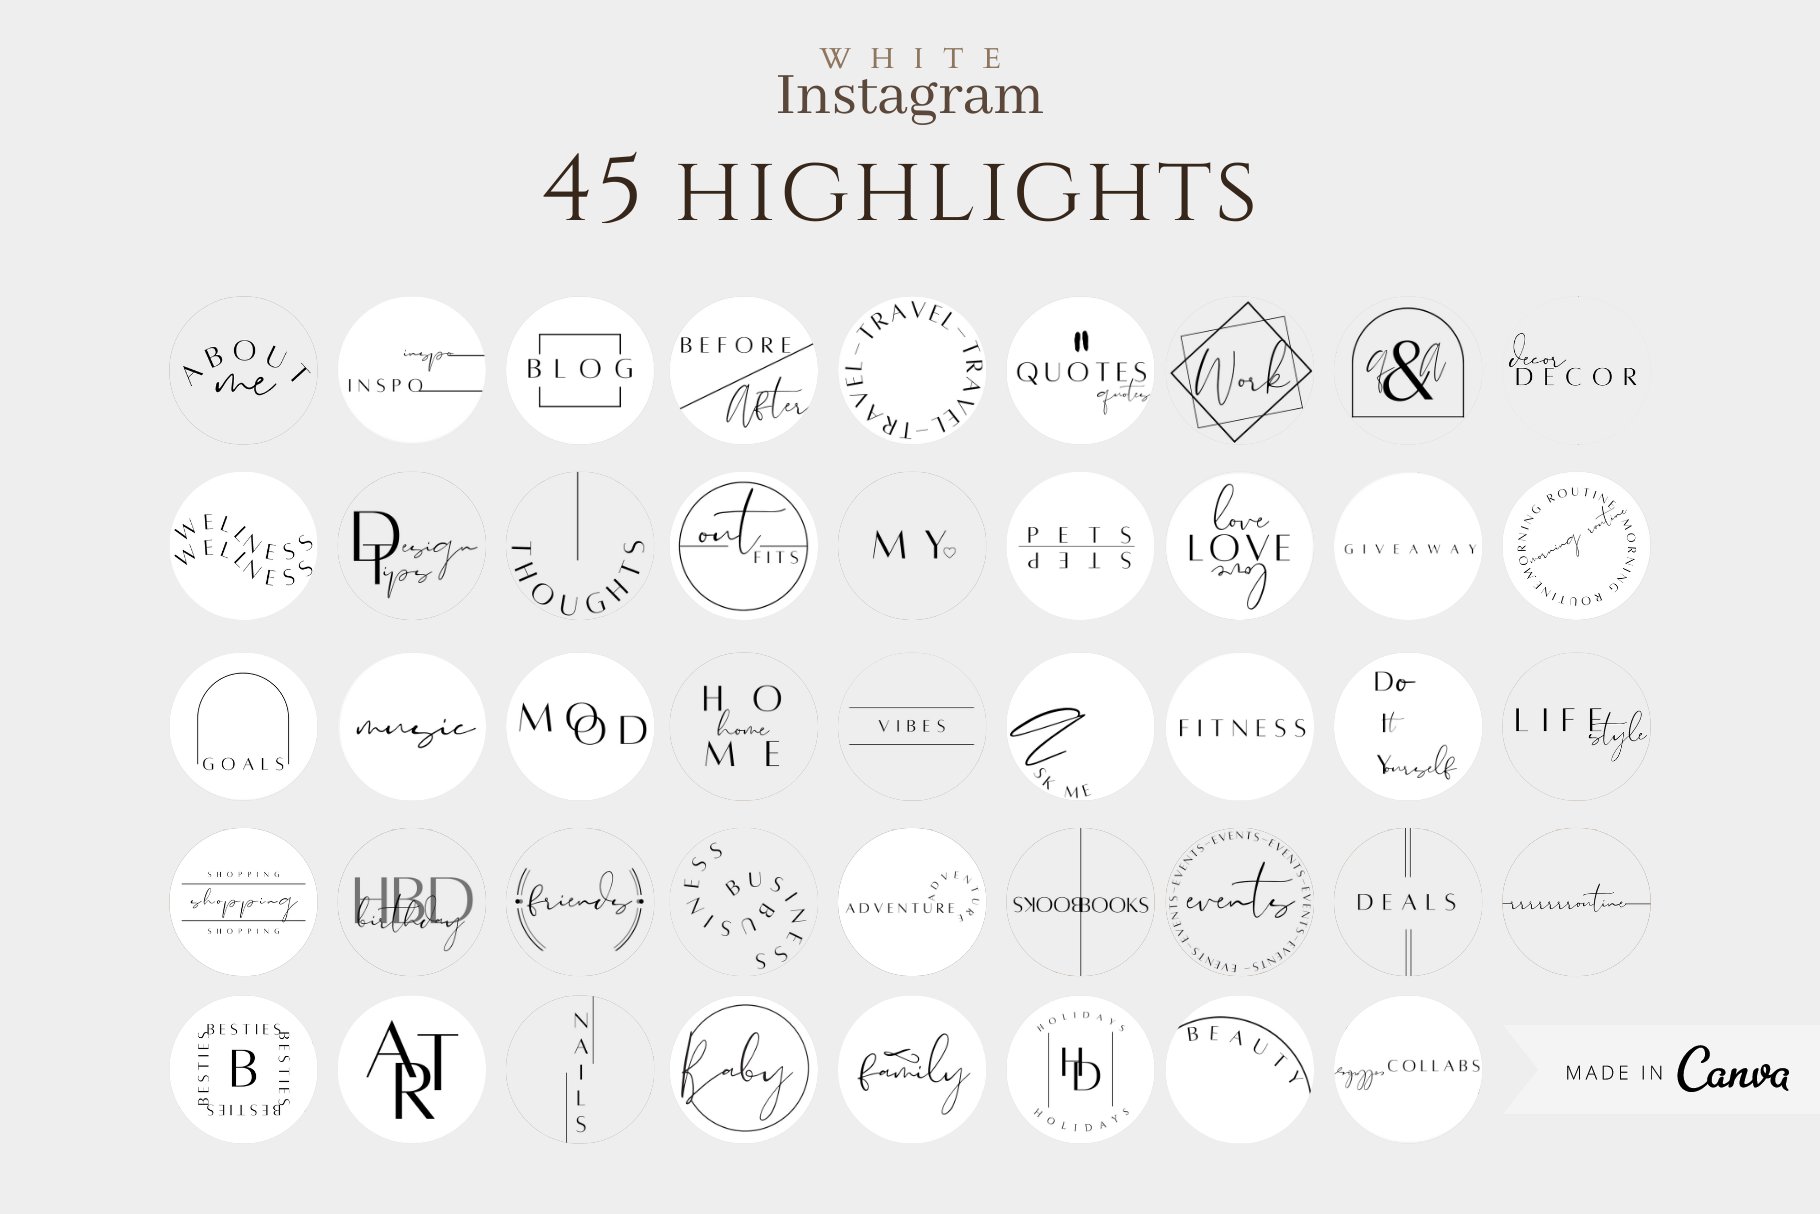 Bundle includes 45 icons for your highlights.